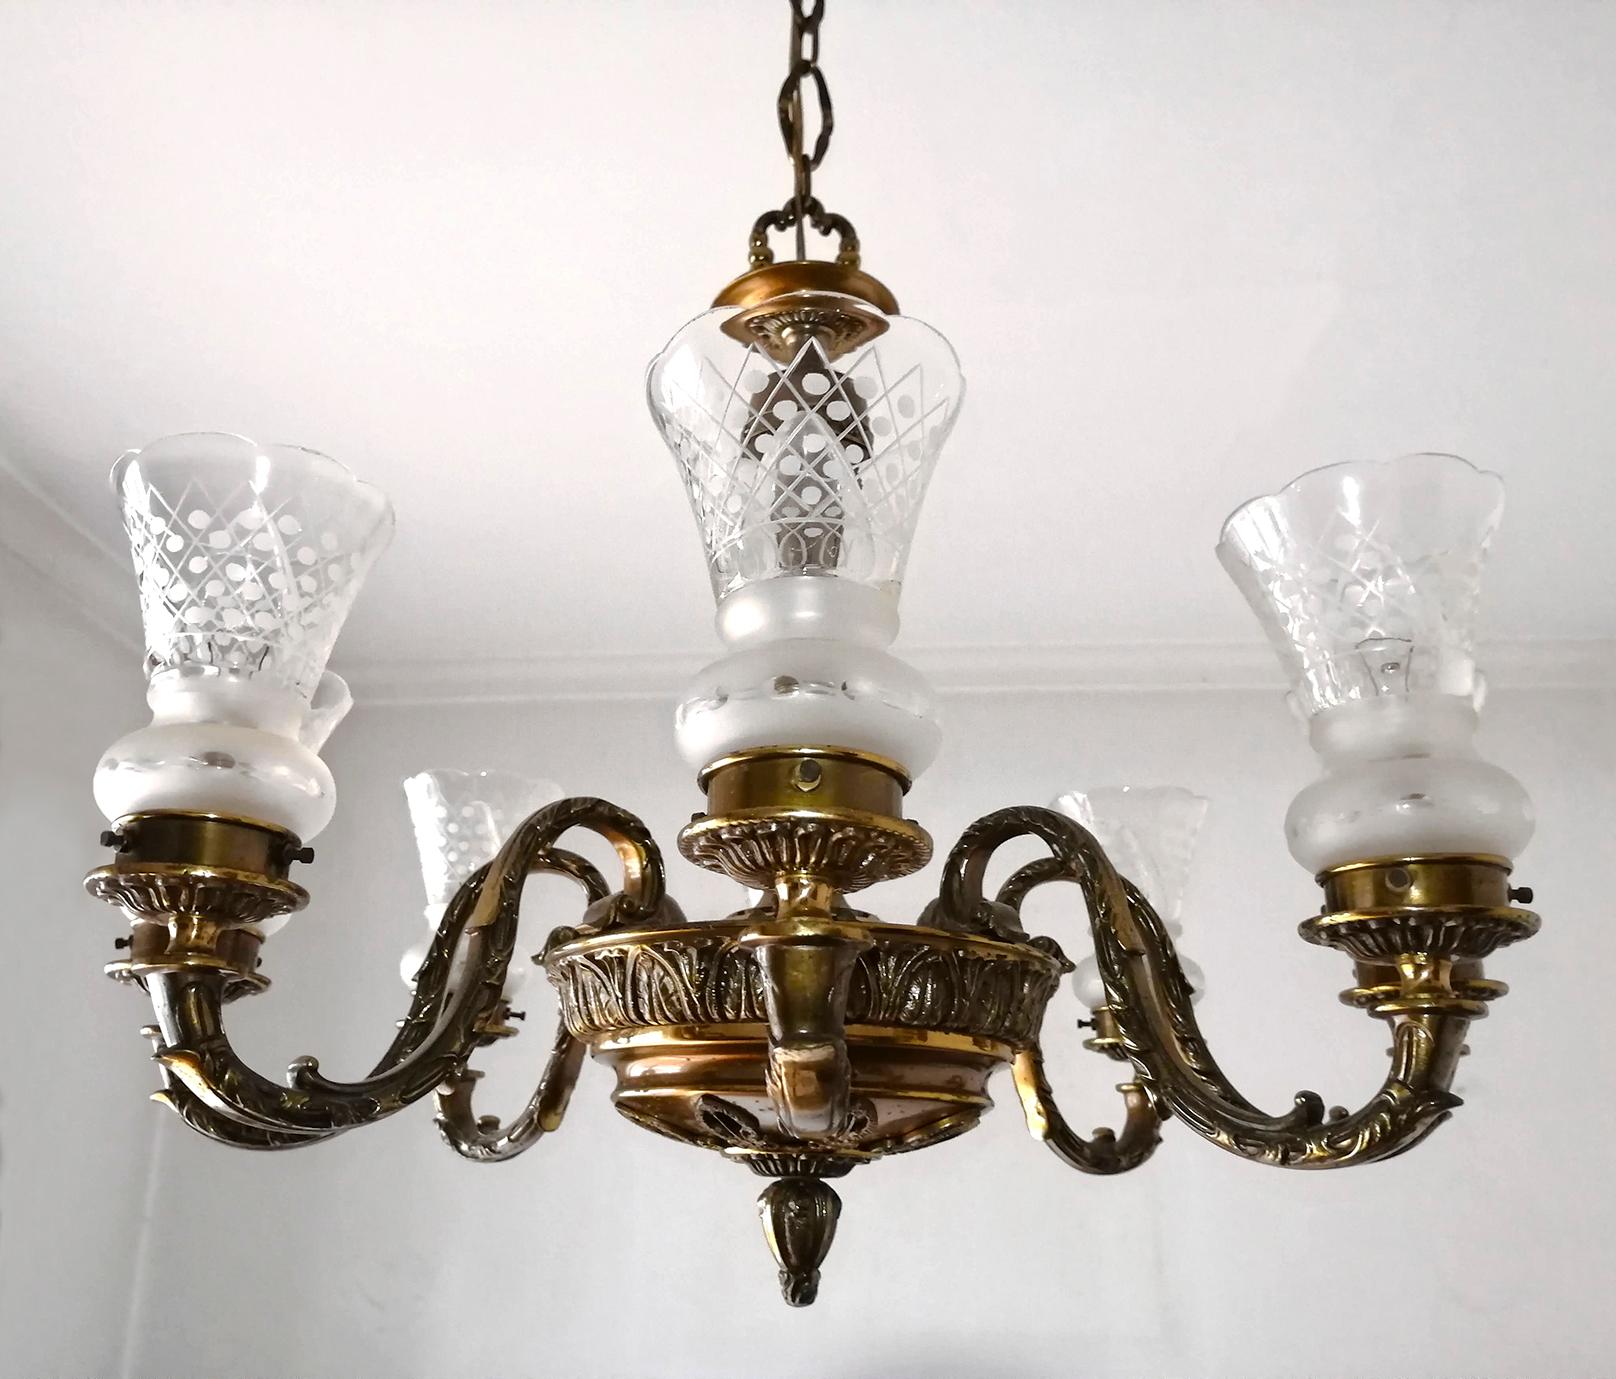 Antique French Empire Neoclassical Gilt Bronze Chandelier, Early 20th Century In Good Condition For Sale In Coimbra, PT